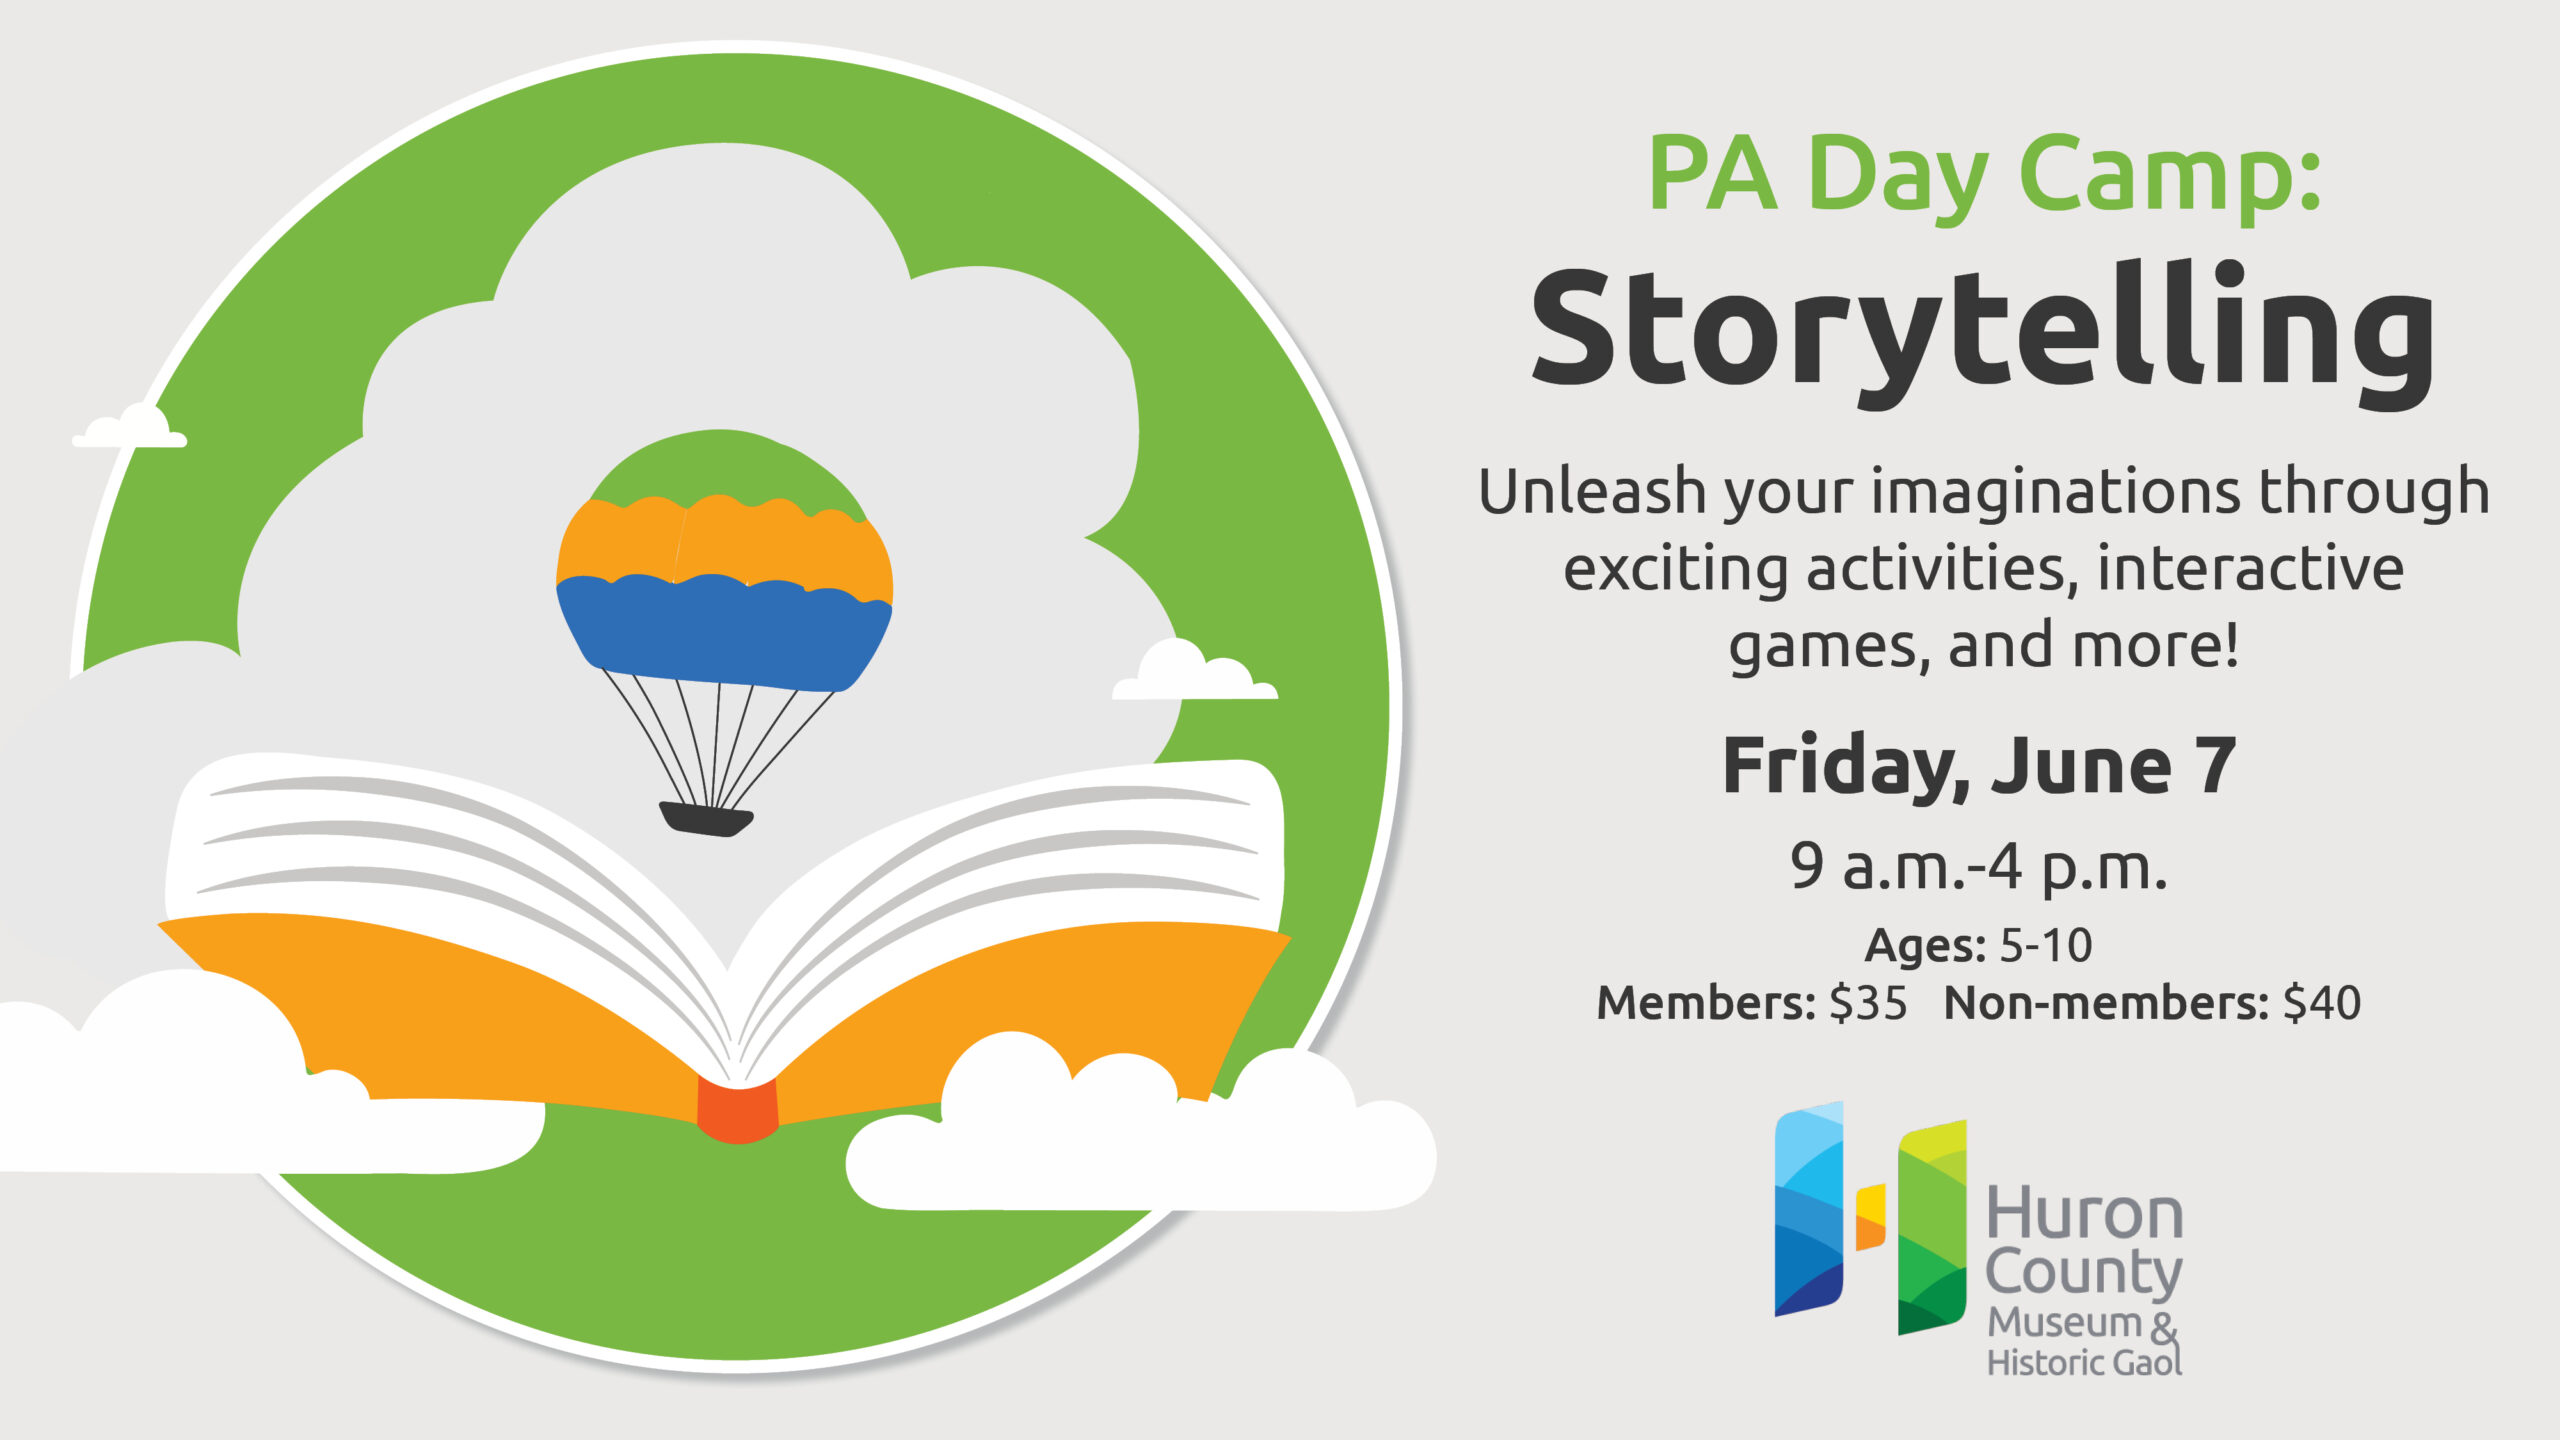 Illustration of an open book with clouds and hot air balloon coming out of the book. Text promotes Storytelling day camp